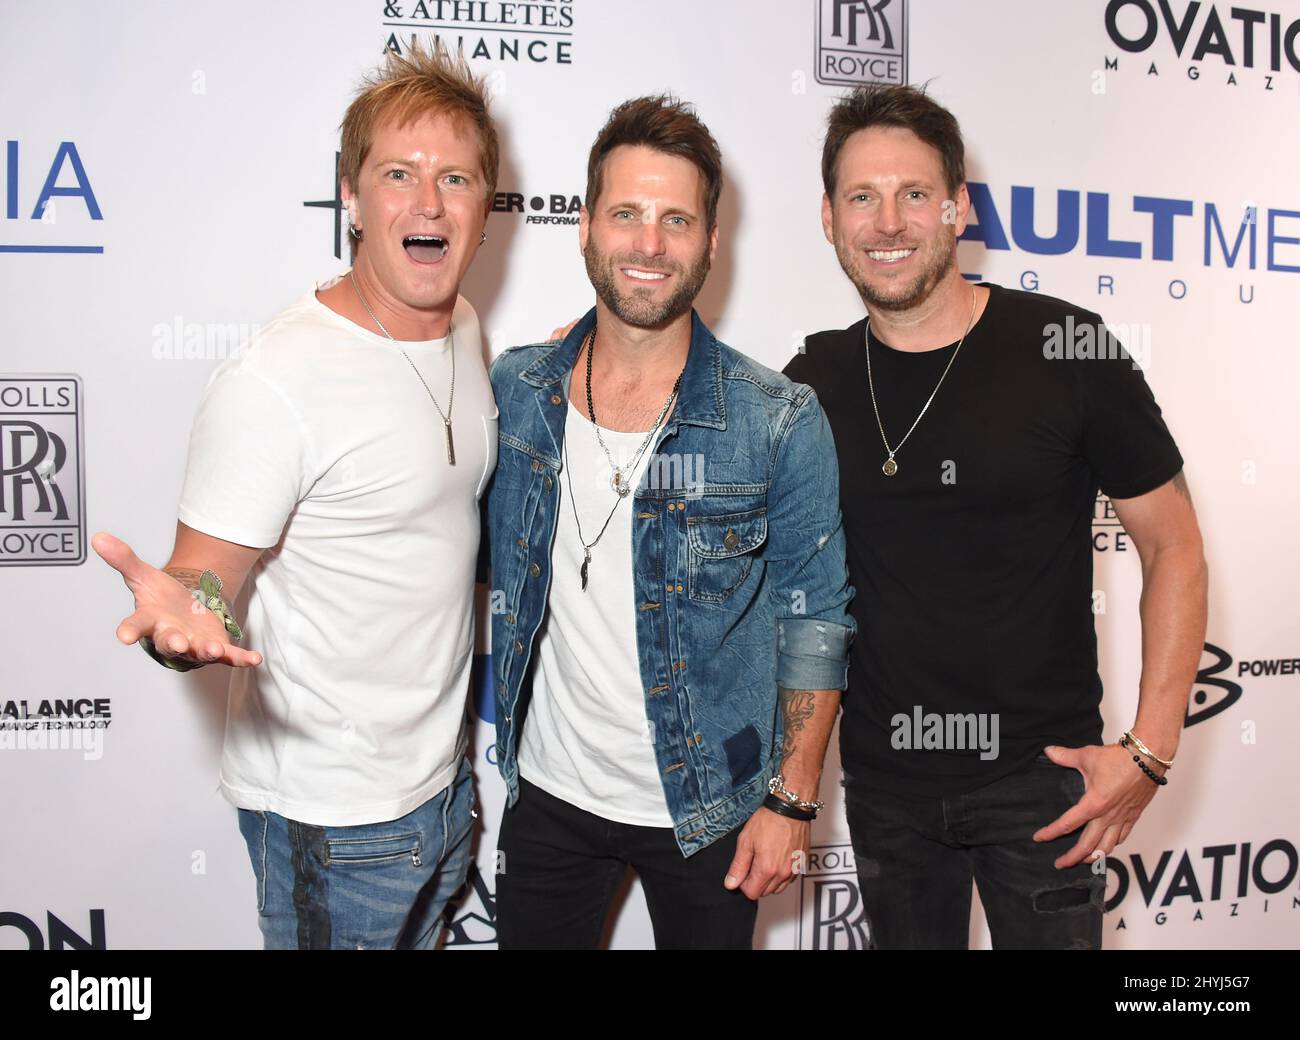 Parmalee at the Vault Media Group's NFL Kickoff Party held at STK Nashville Stock Photo